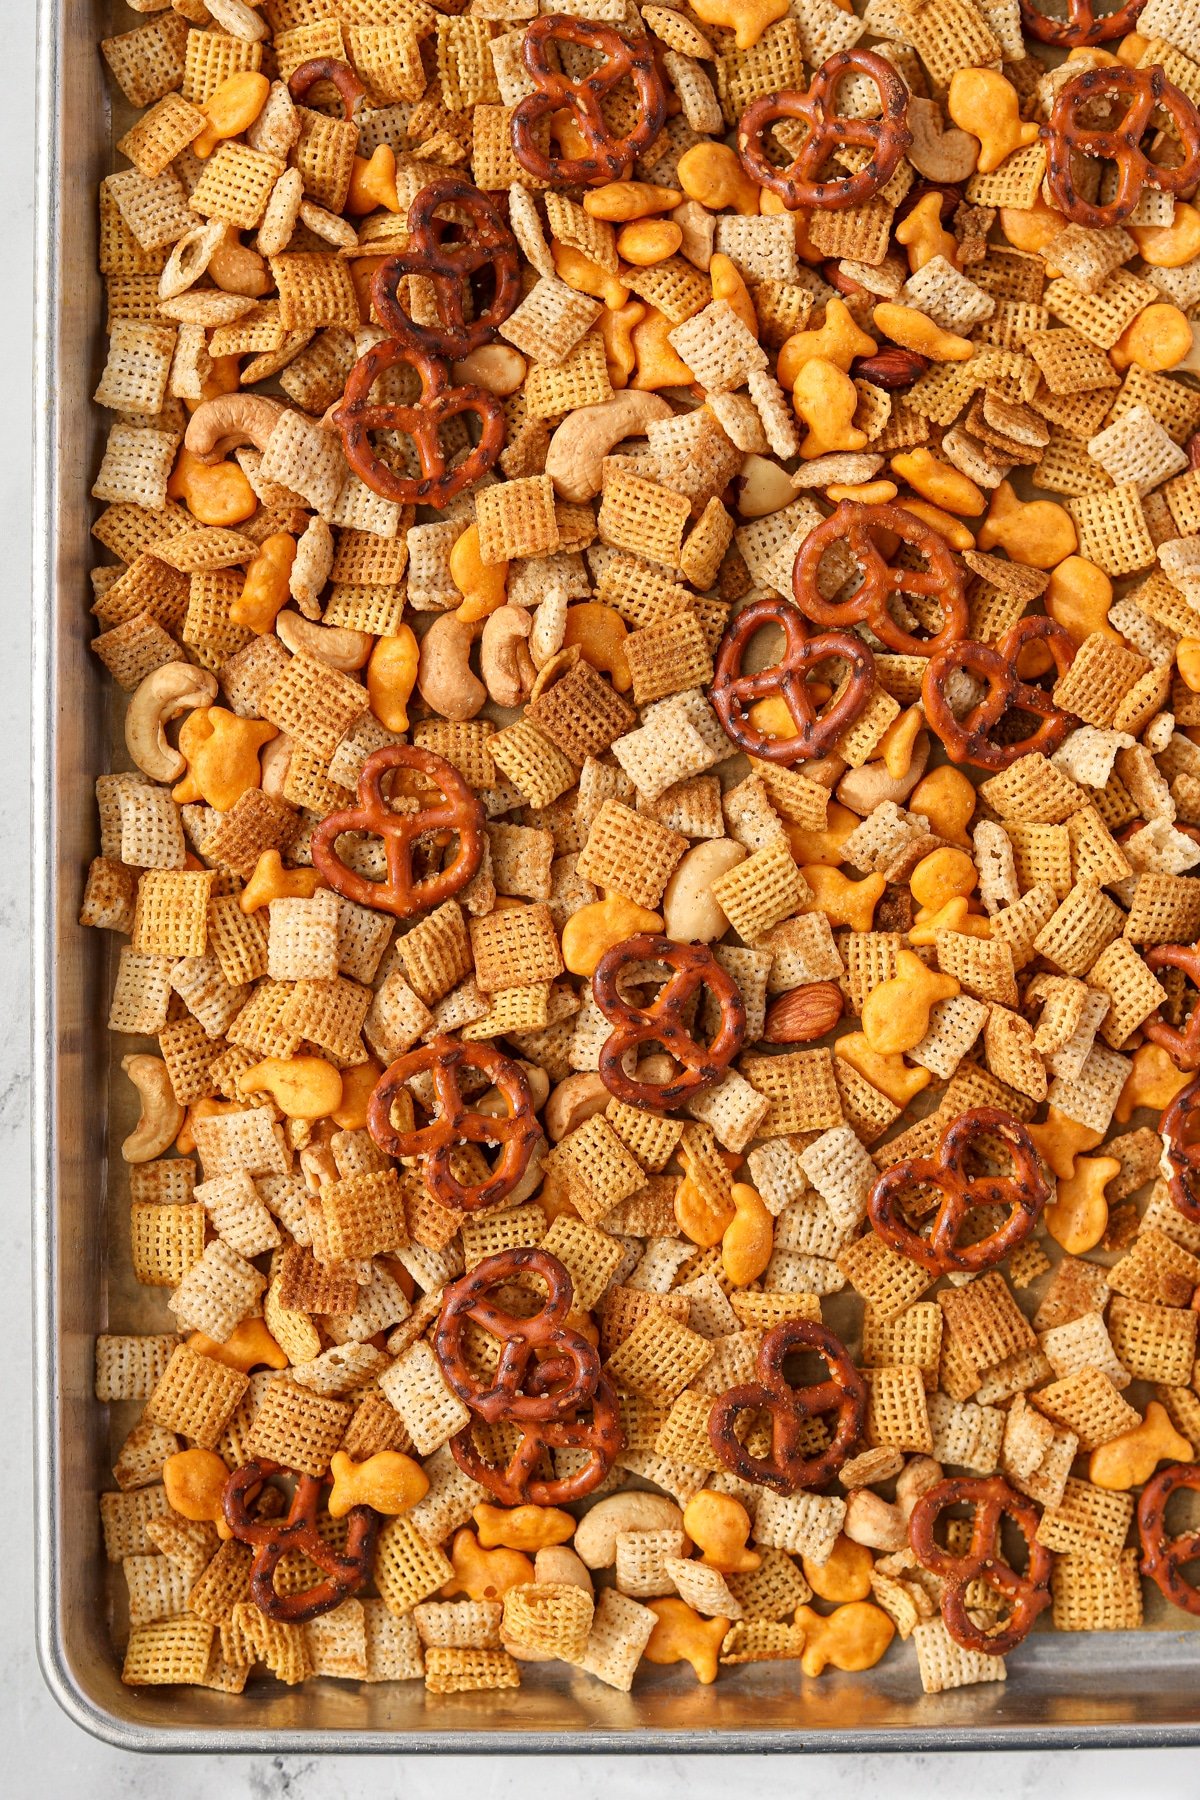 A baking sheet filled with Chex Mix.